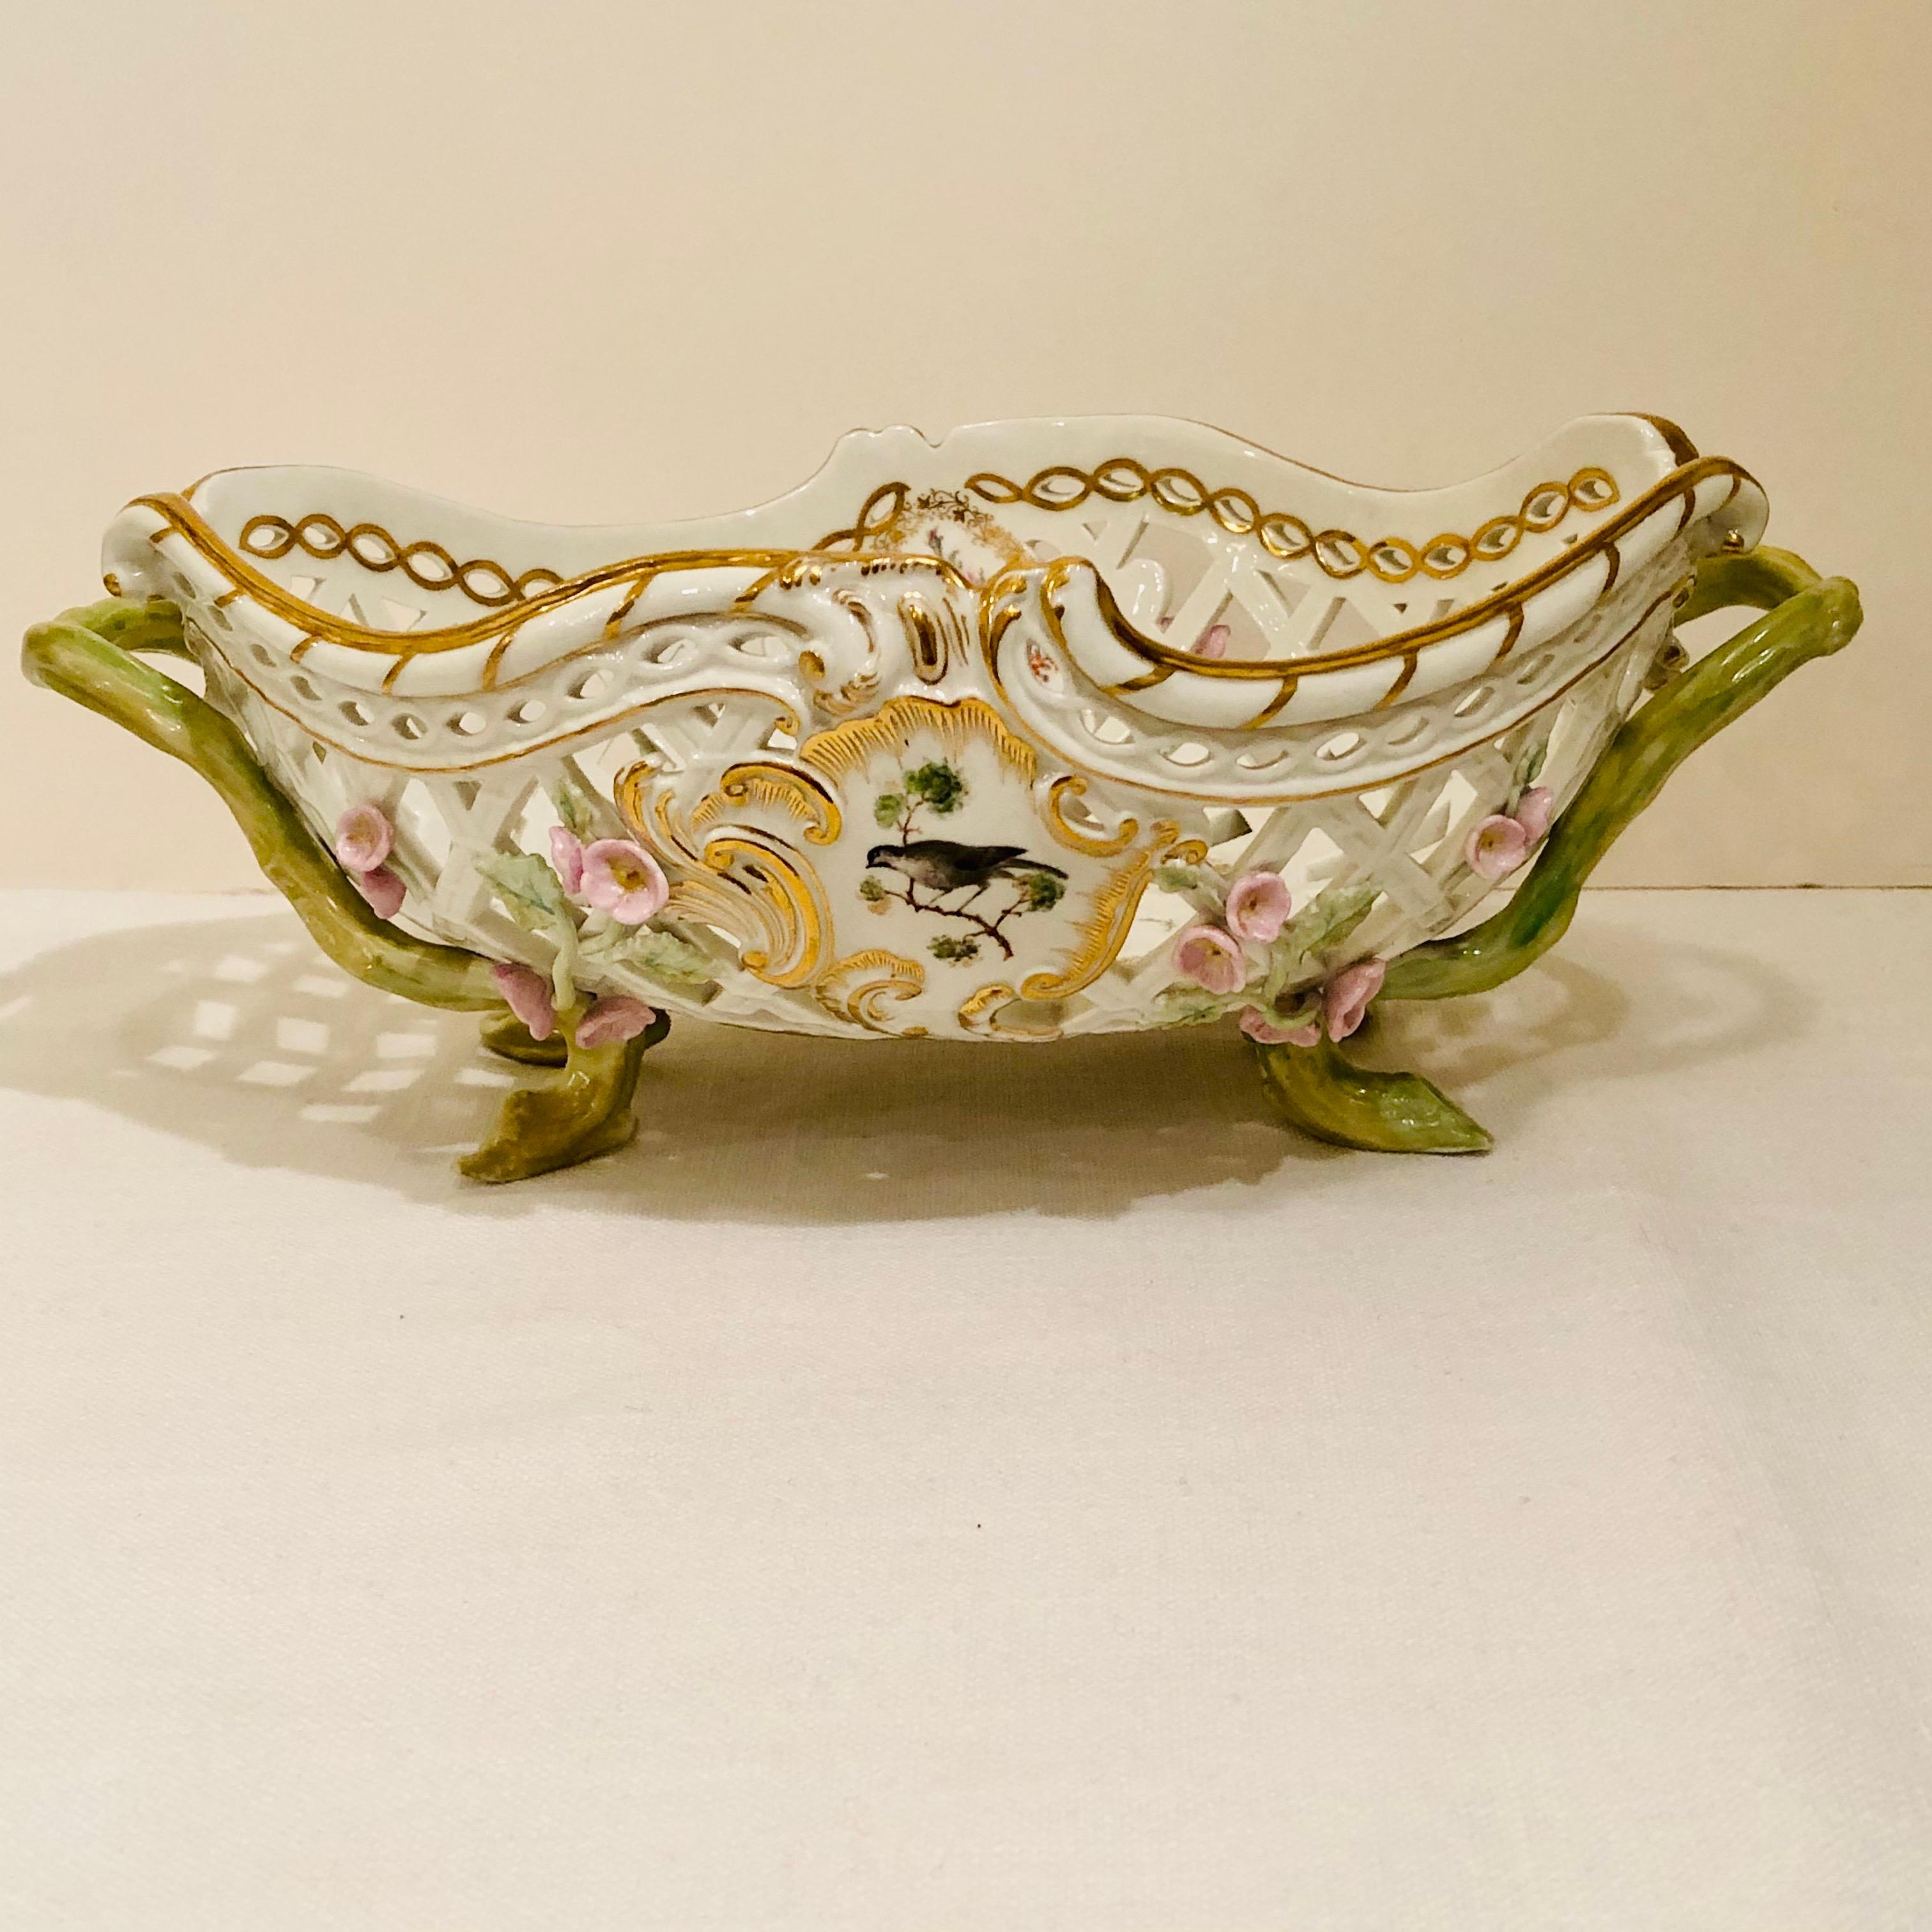 This is a fabulous KPM bowl beautifully decorated with reticulation and raised pink flowers. Each side of the KPM bowl is painted with a different bird painting. The inside of the bowl is painted with five different medallions of flower bouquets as